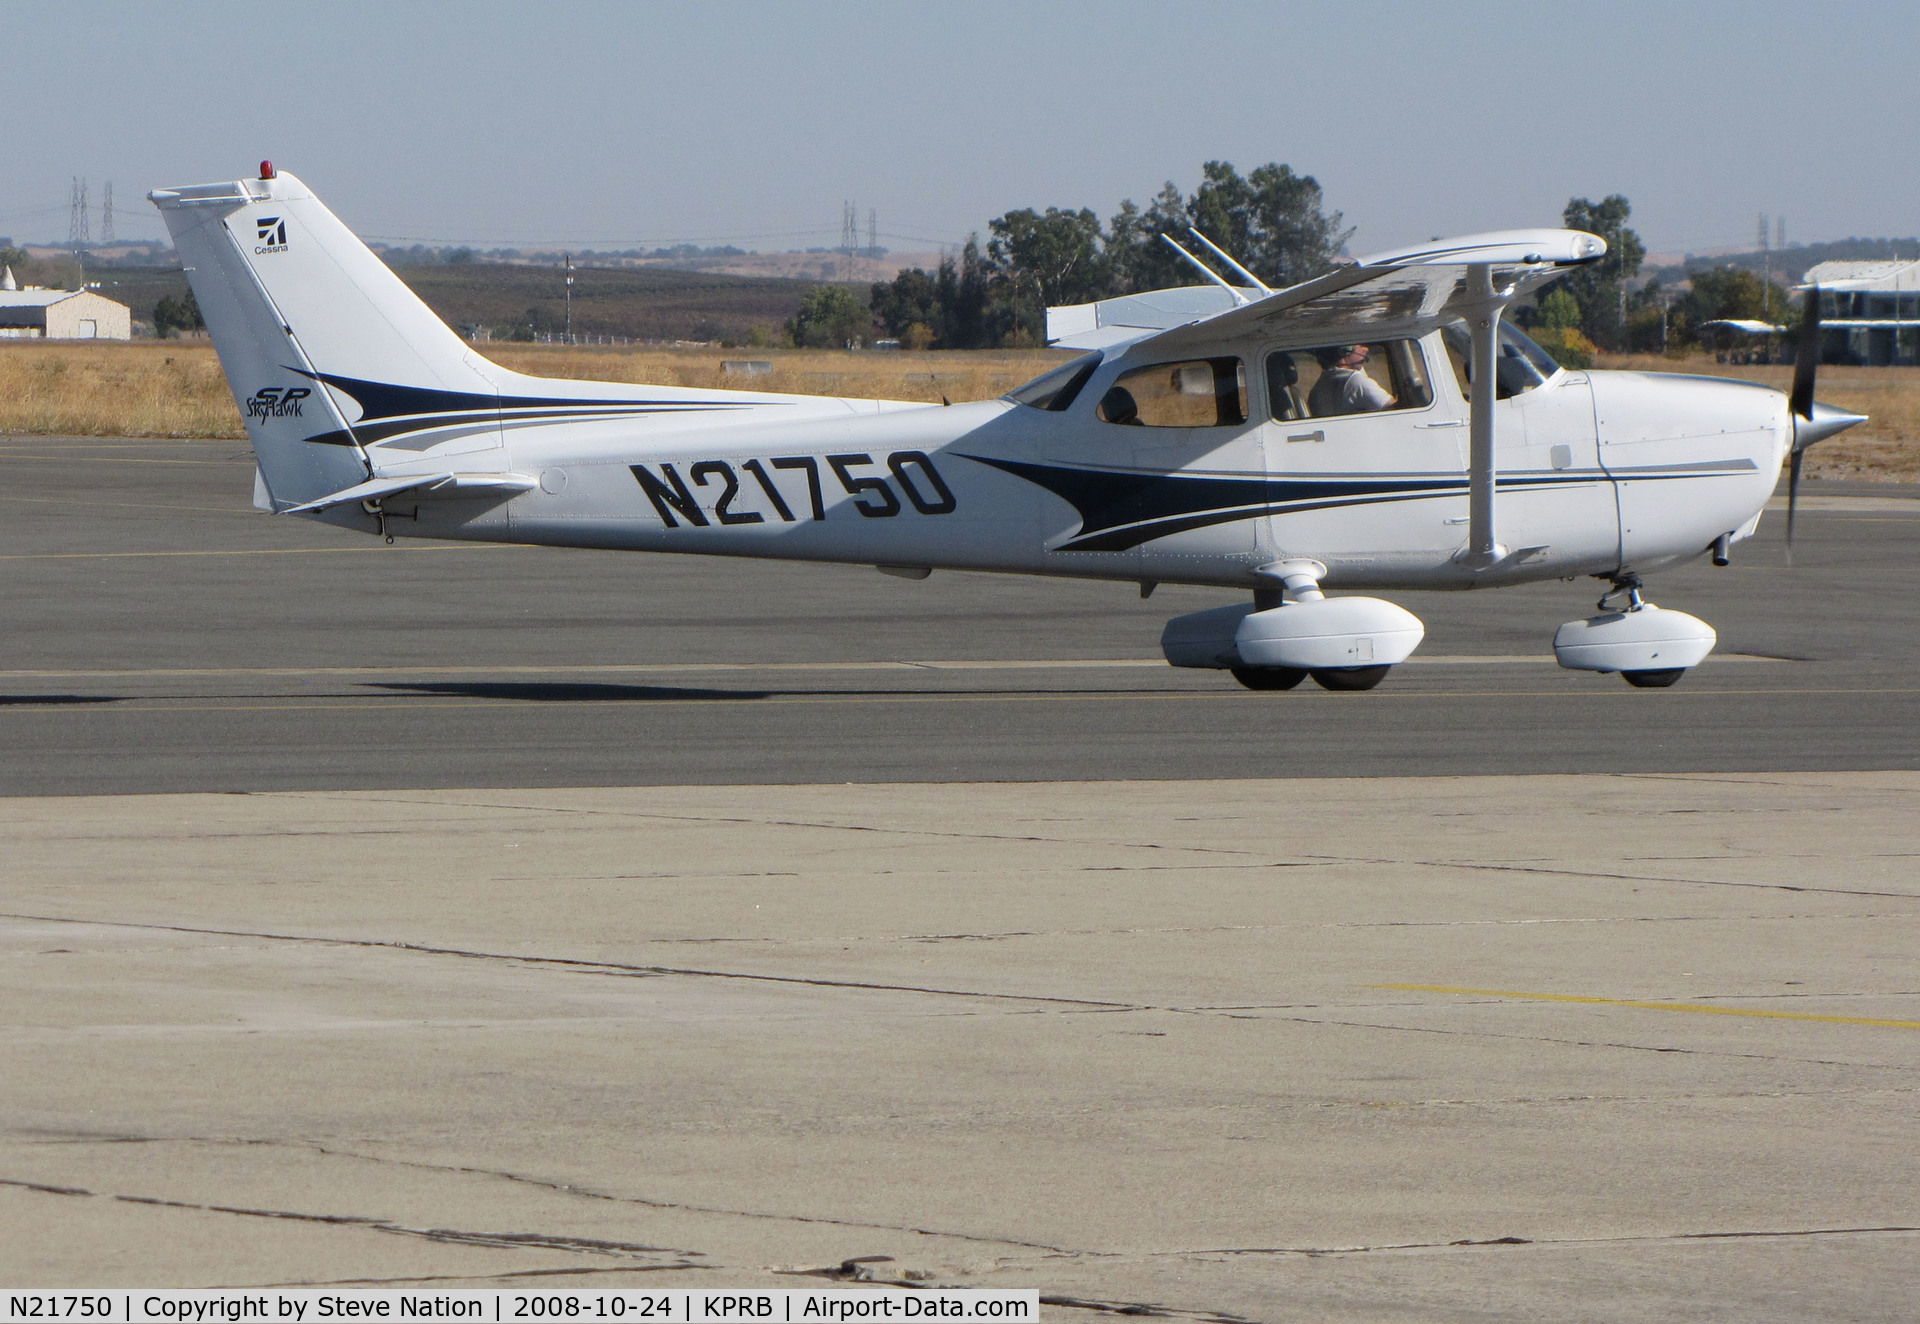 N21750, 2004 Cessna 172S C/N 172S9641, 2004 Cessna 172S Skyhawk taxiing for takeoff after visiting @Paso Robles Municipal Airport, CA